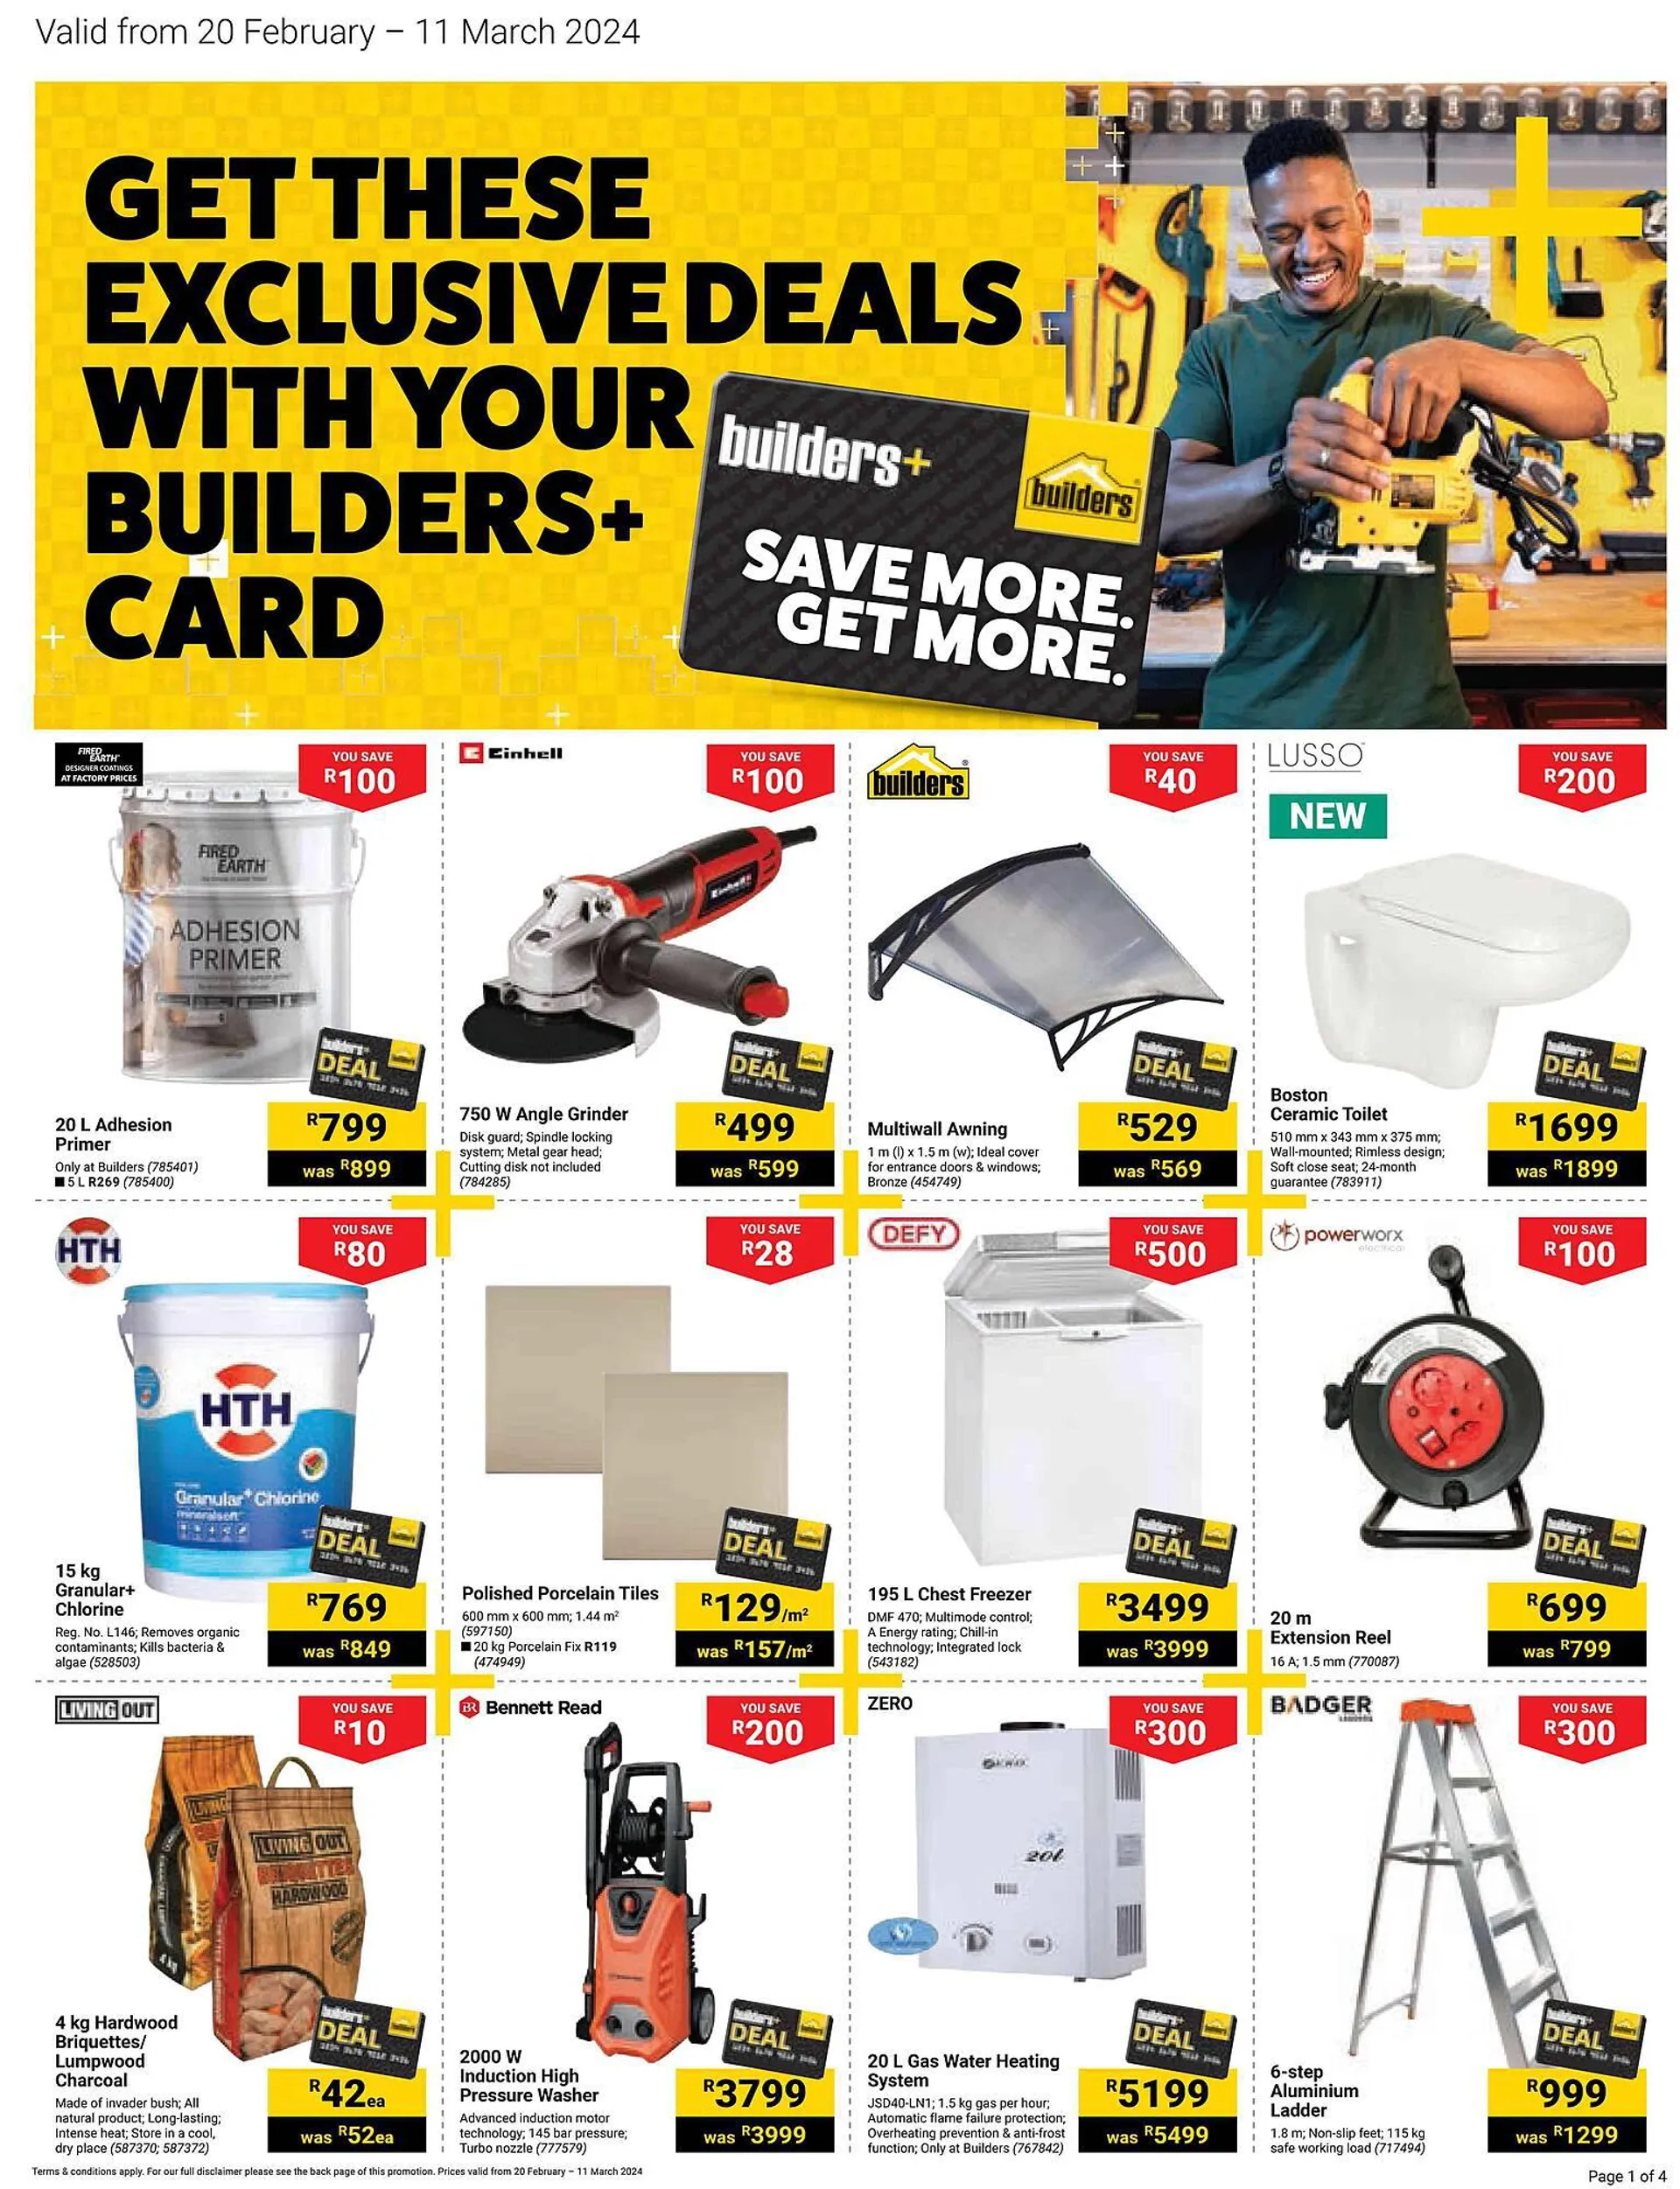 Builders Warehouse catalogue - 20 February 11 March 2024